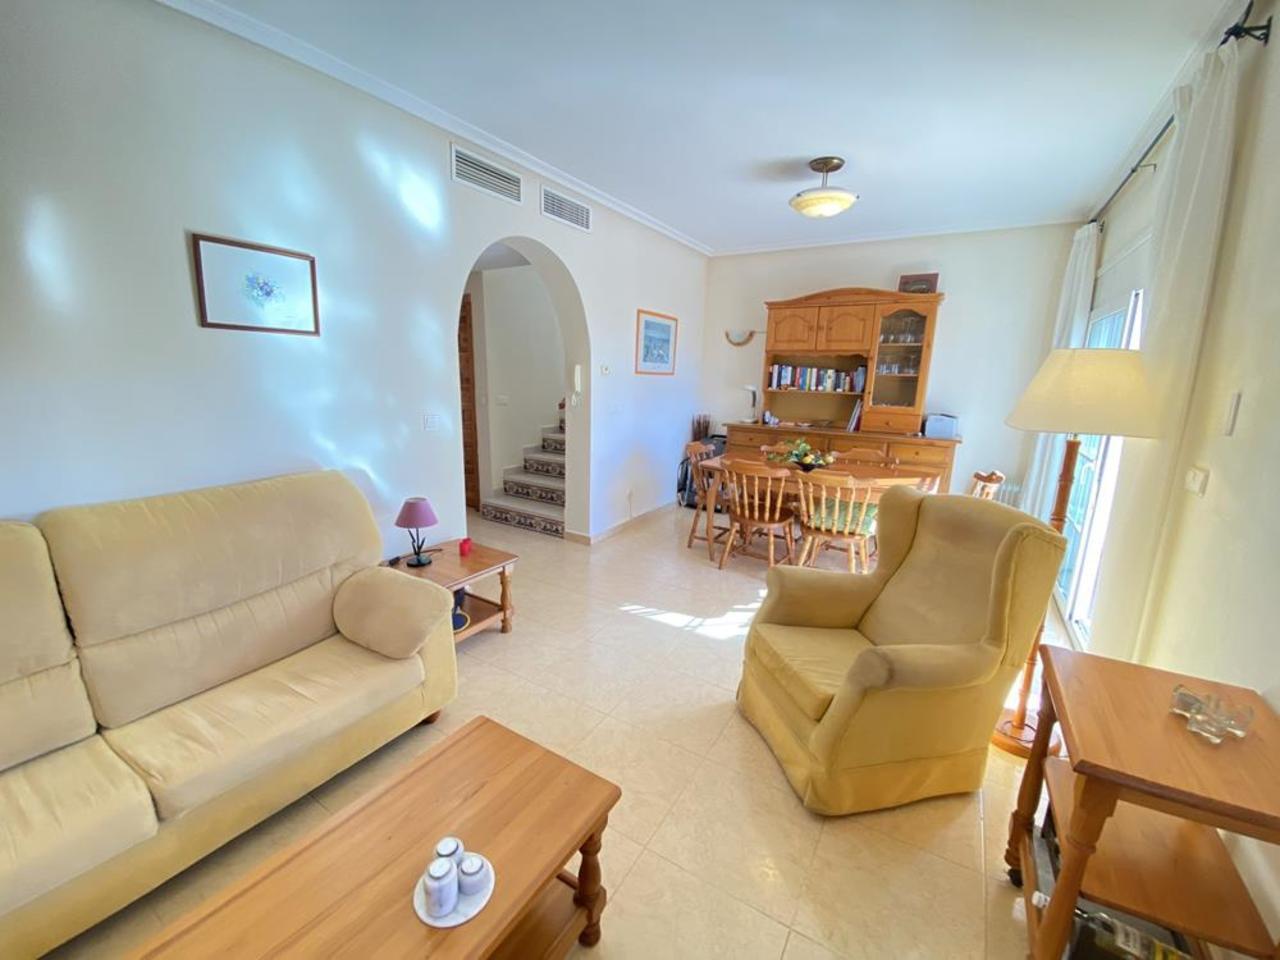 Ref: SVM687096-1 Villa for sale in Altaona Golf and Country Village